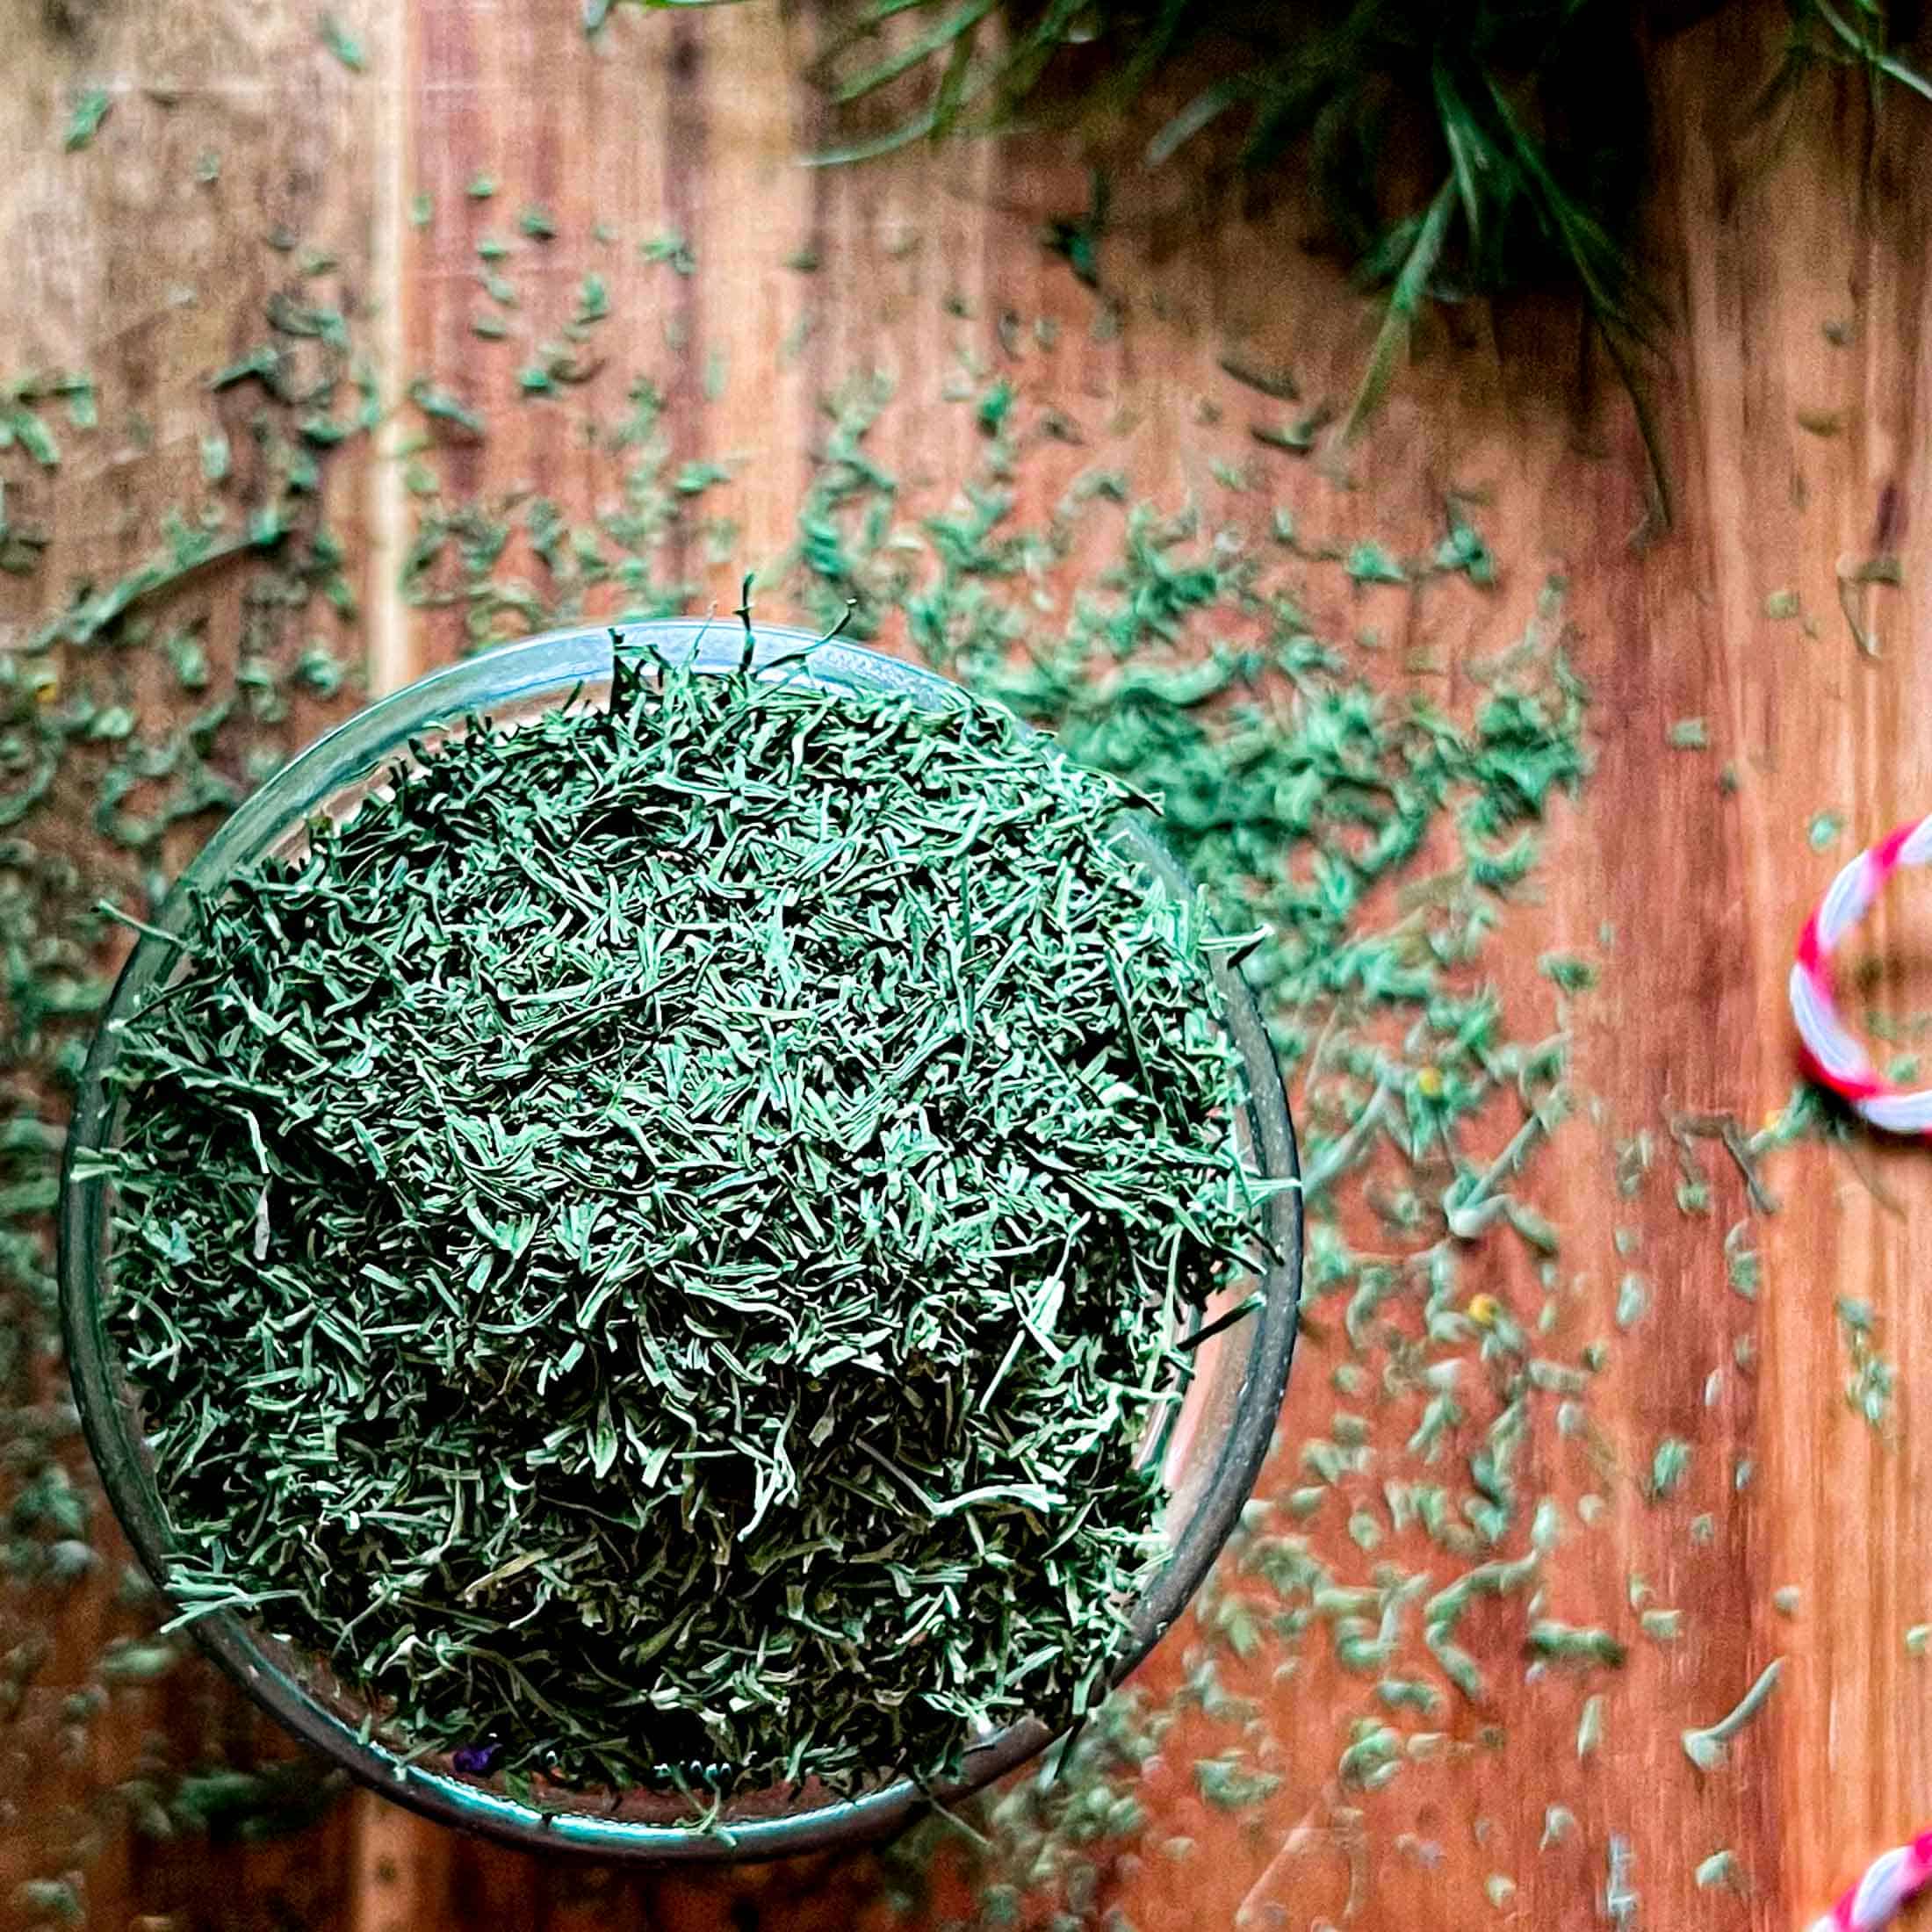 Dry dill flakes in a glass jar, spilling out onto a wooden cutting board.